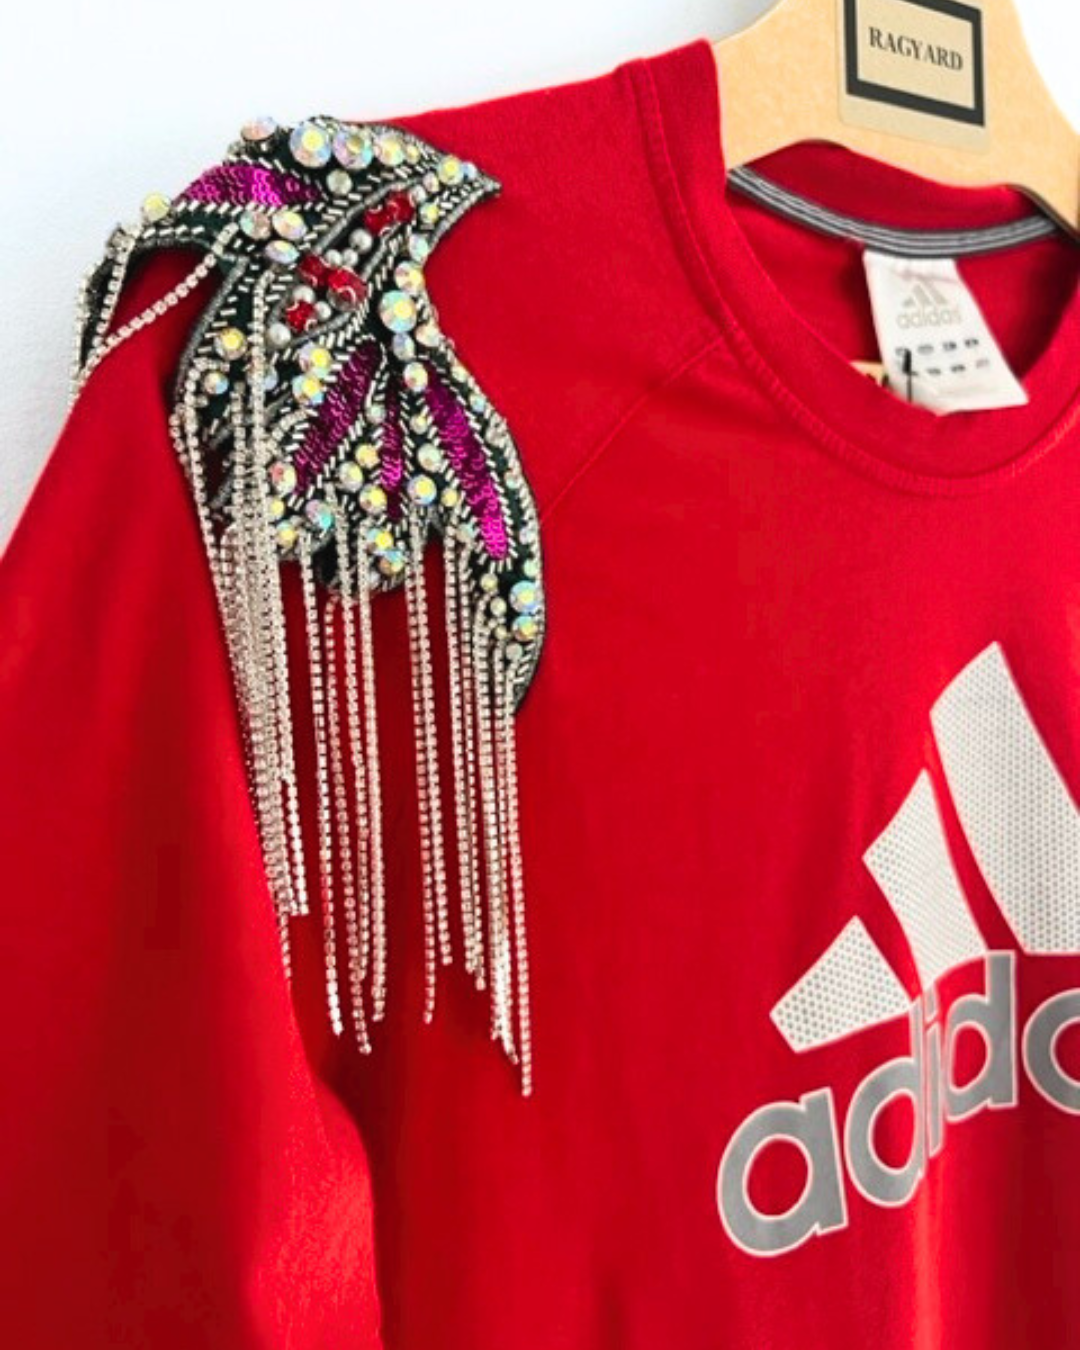 Vintage ADIDAS T-shirt with crystal and chain shoulder embellishment